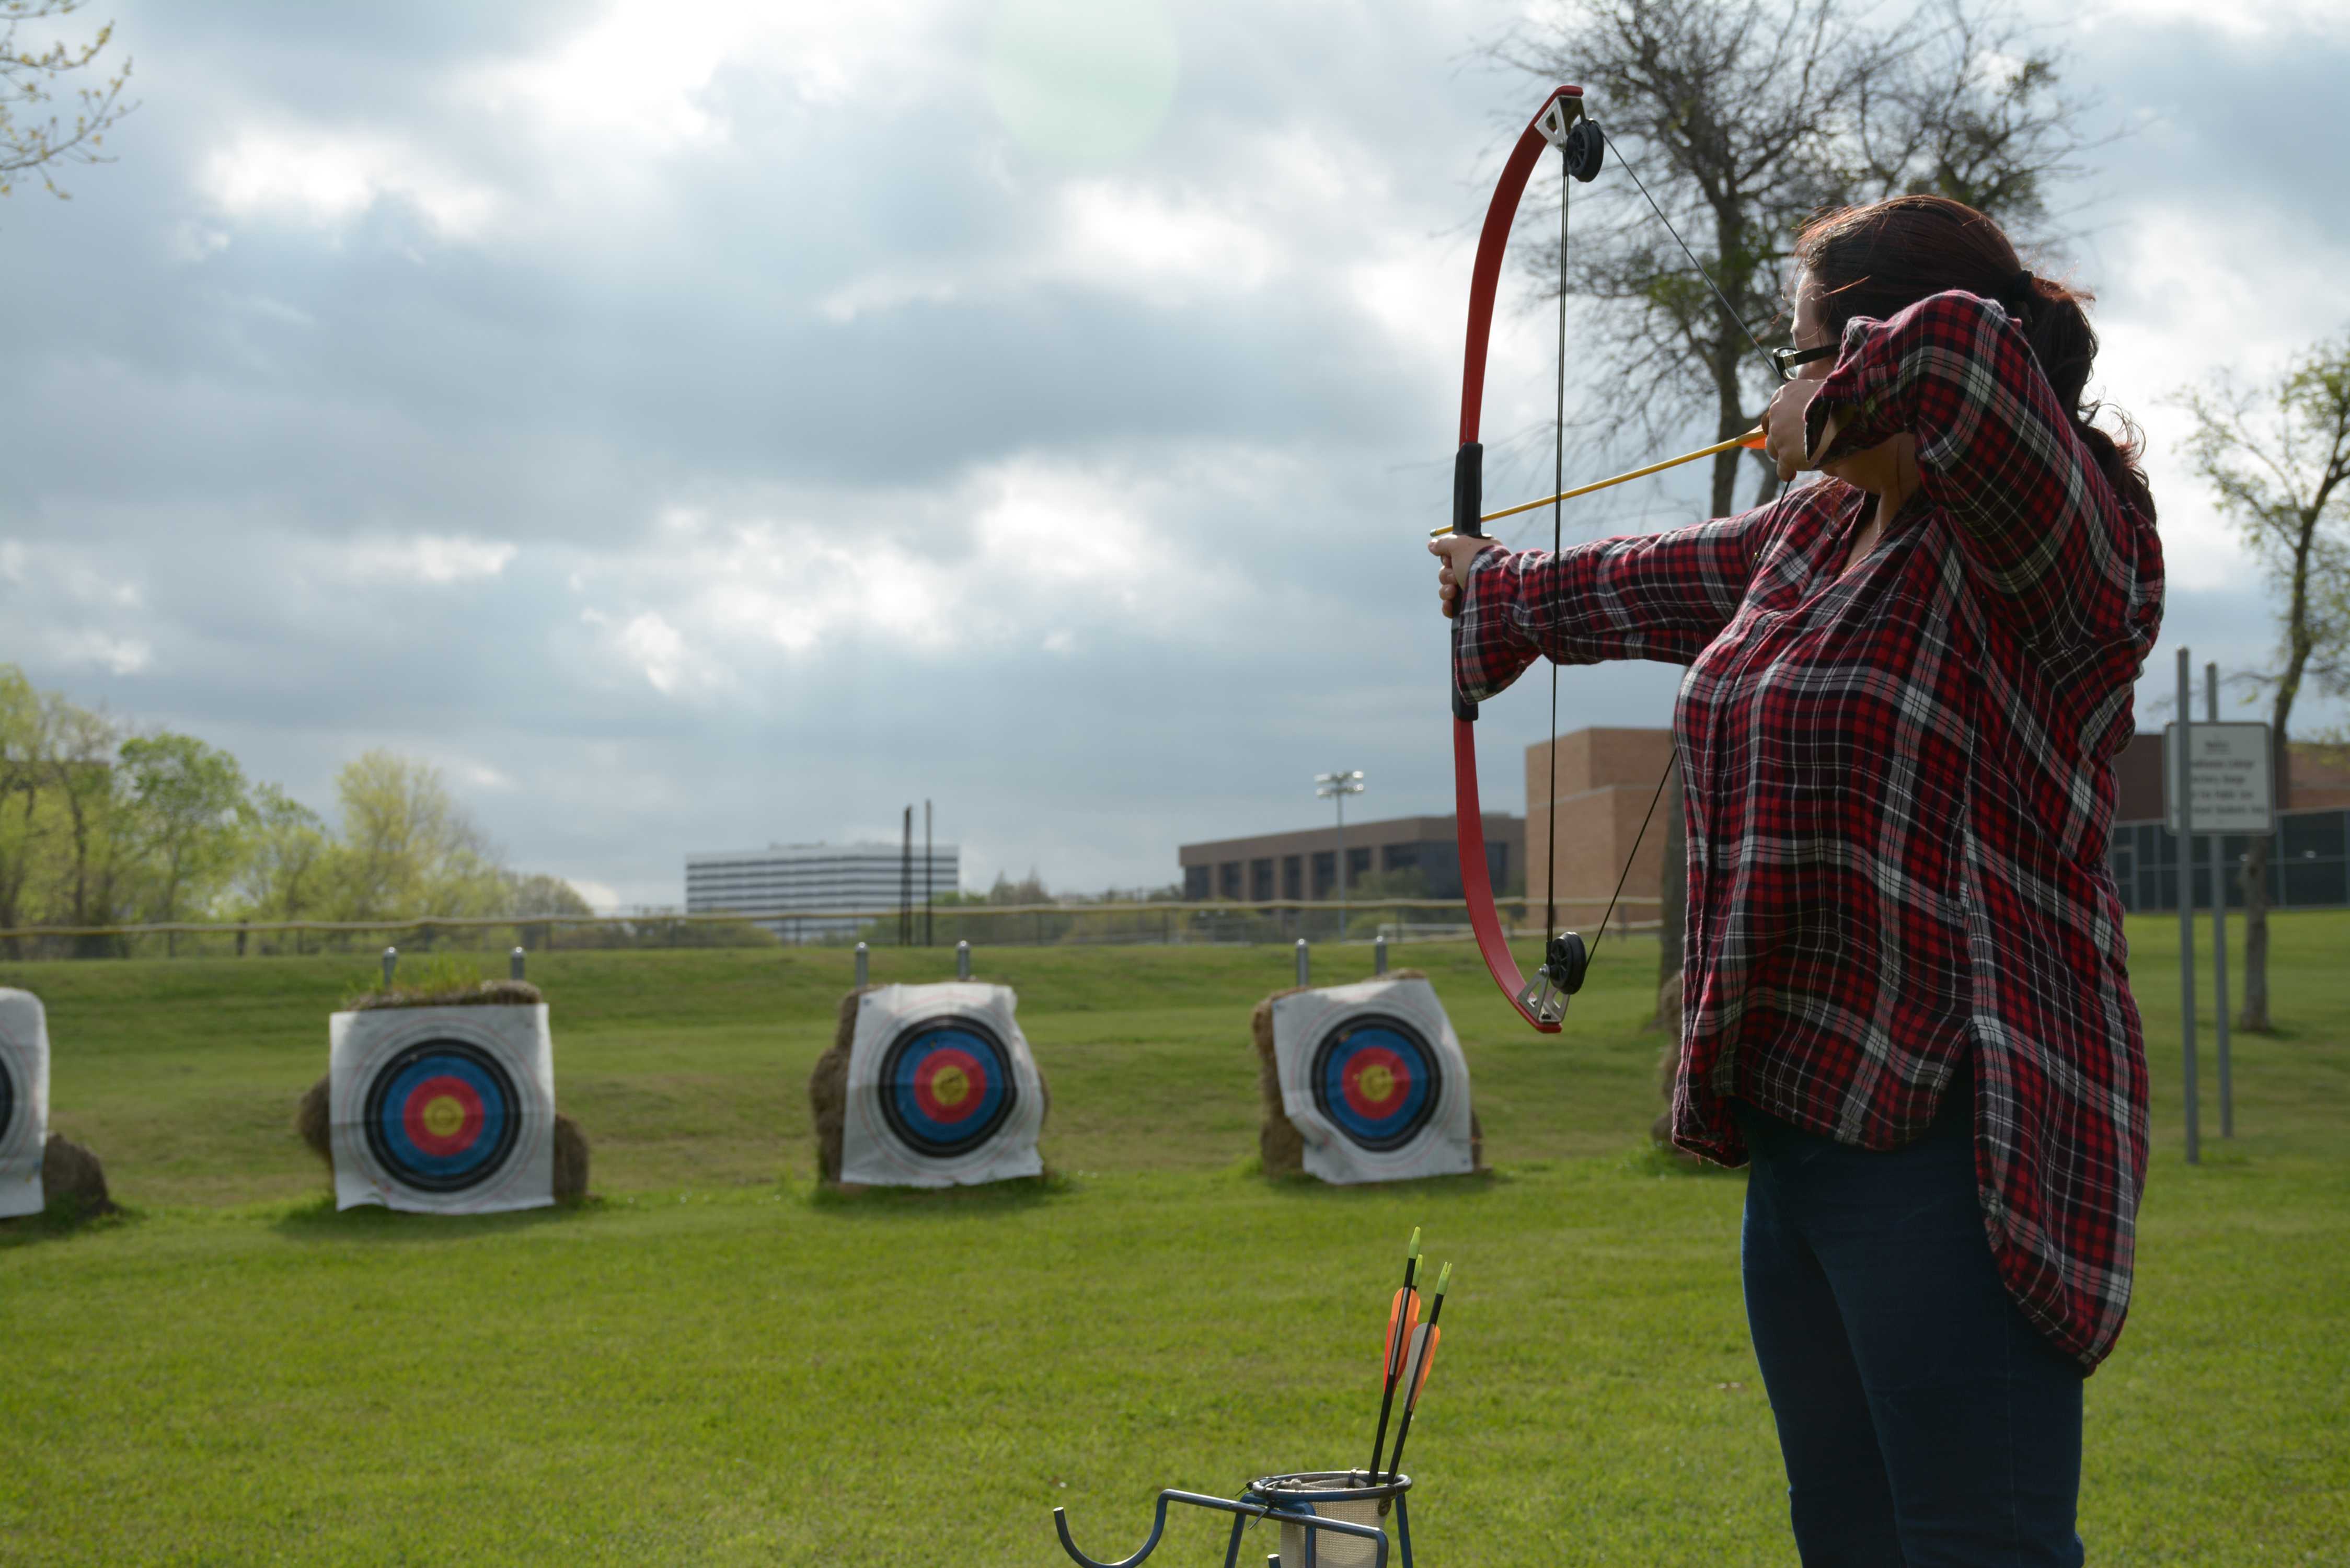  Amy Rogers, a student, prepares to shoot an arrow from her compound bow.